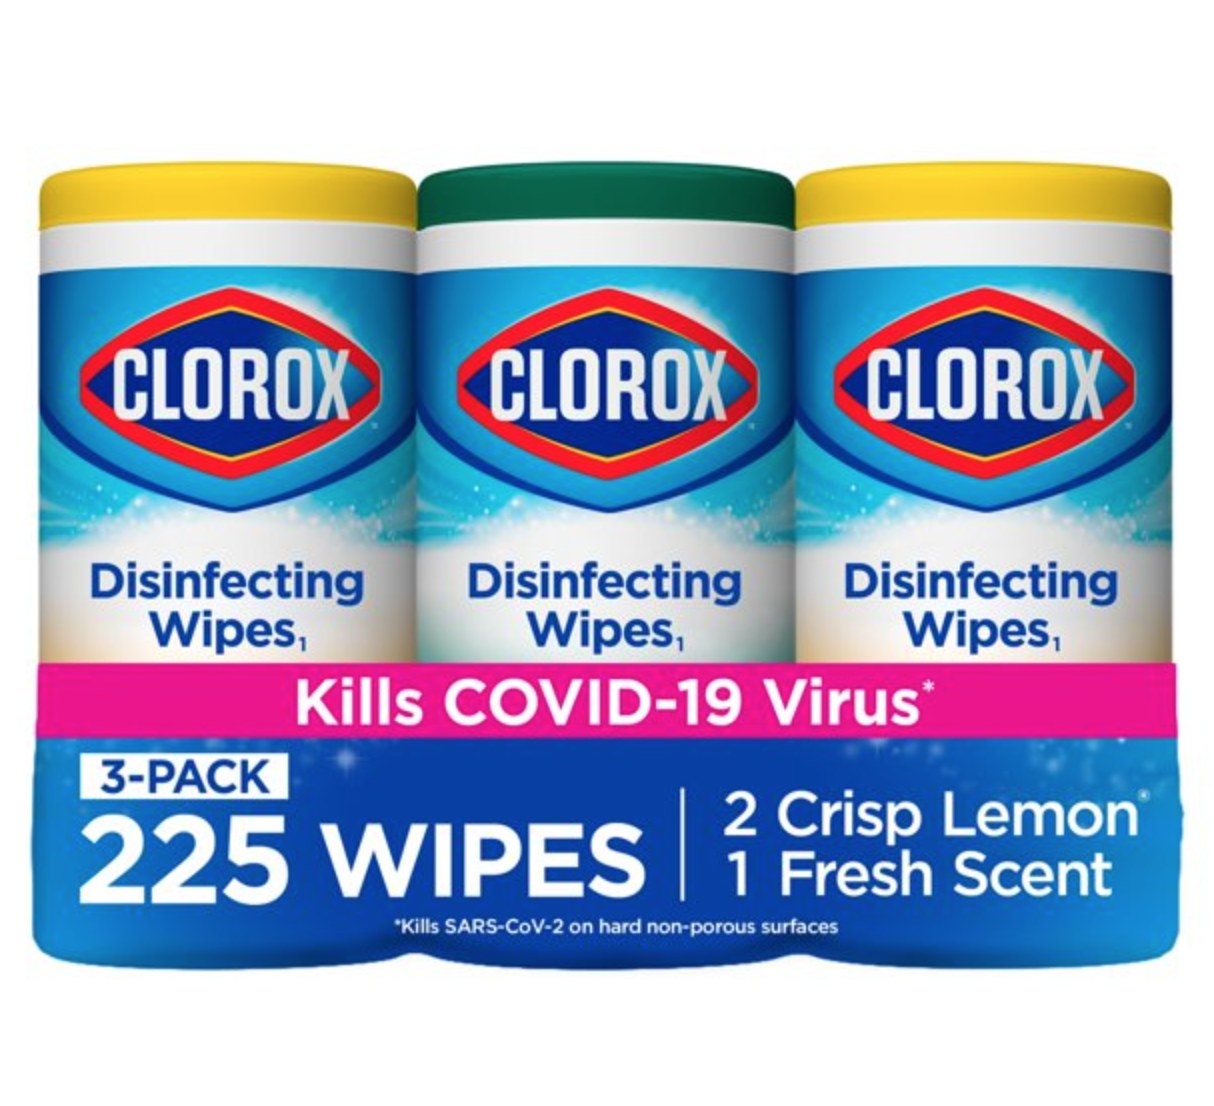 the three pack of disinfecting wipes